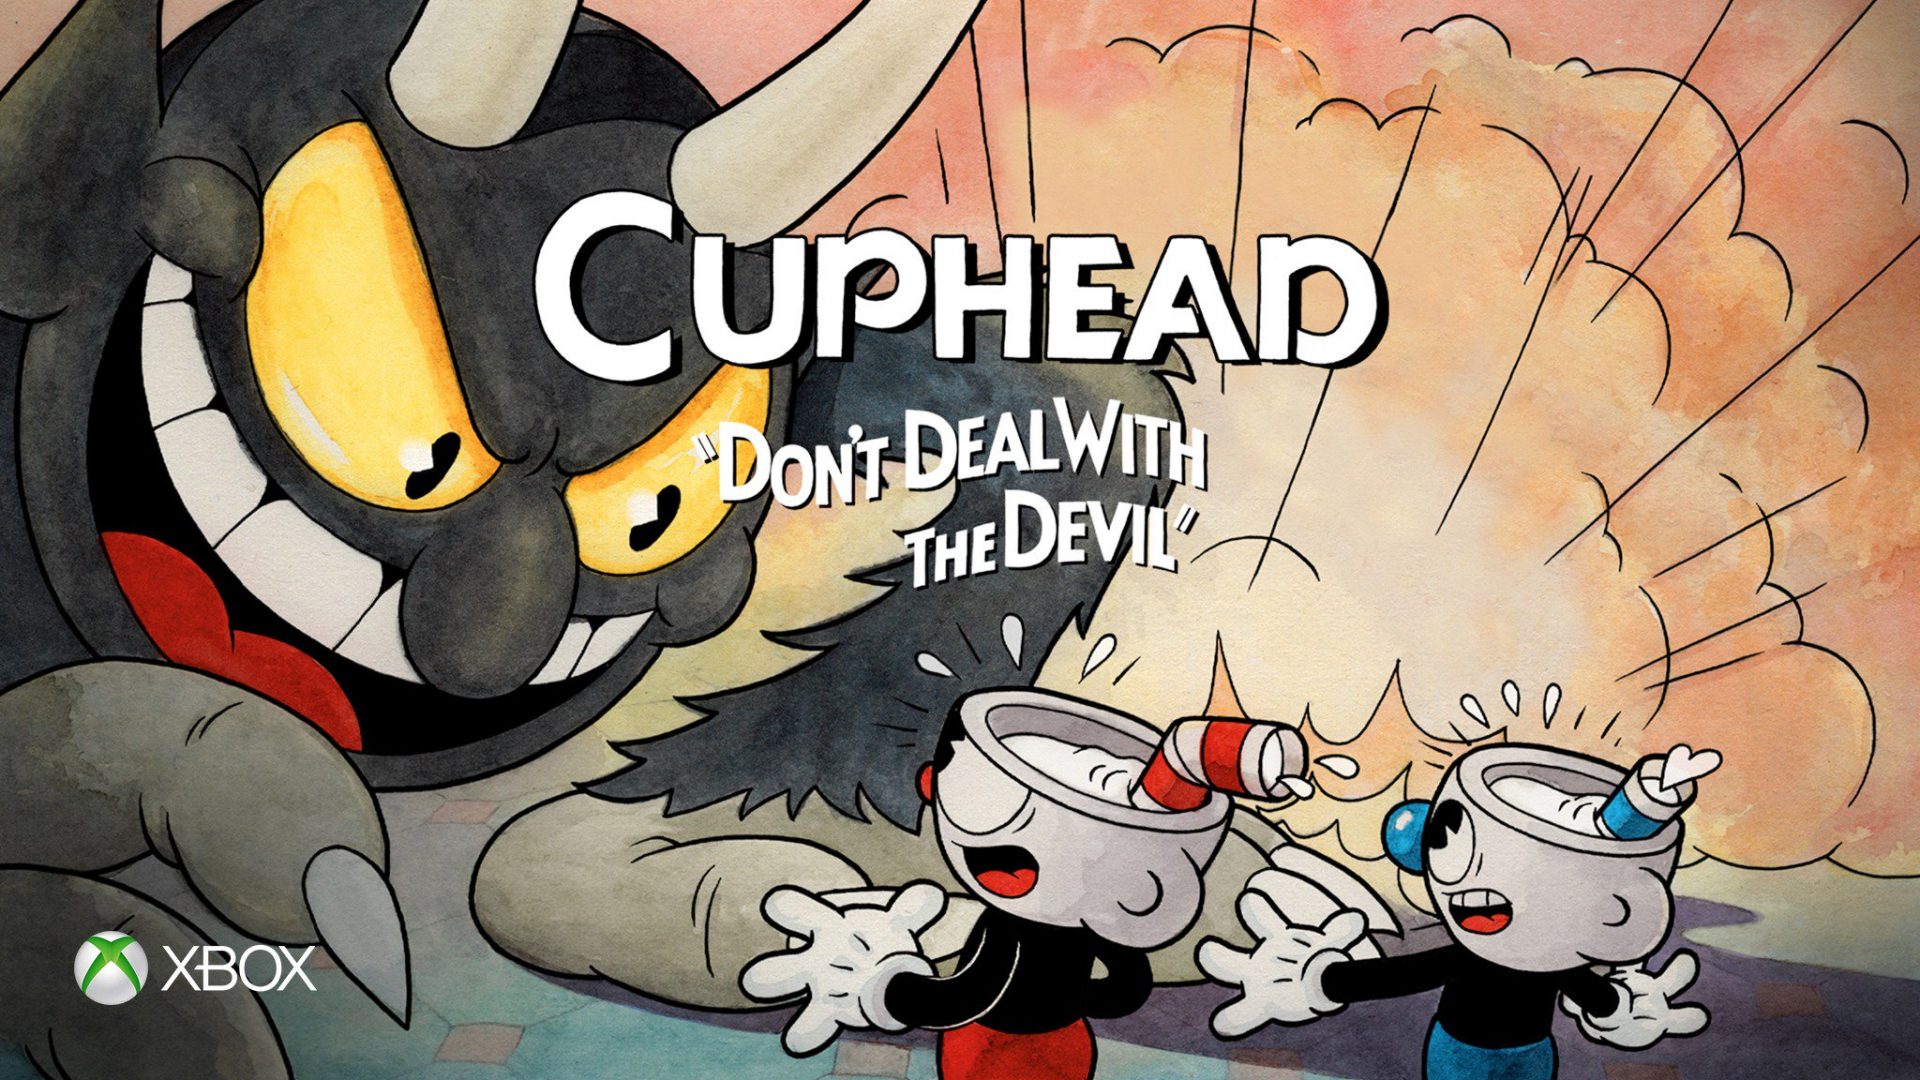 Cup Head Wallpapers on WallpaperDog